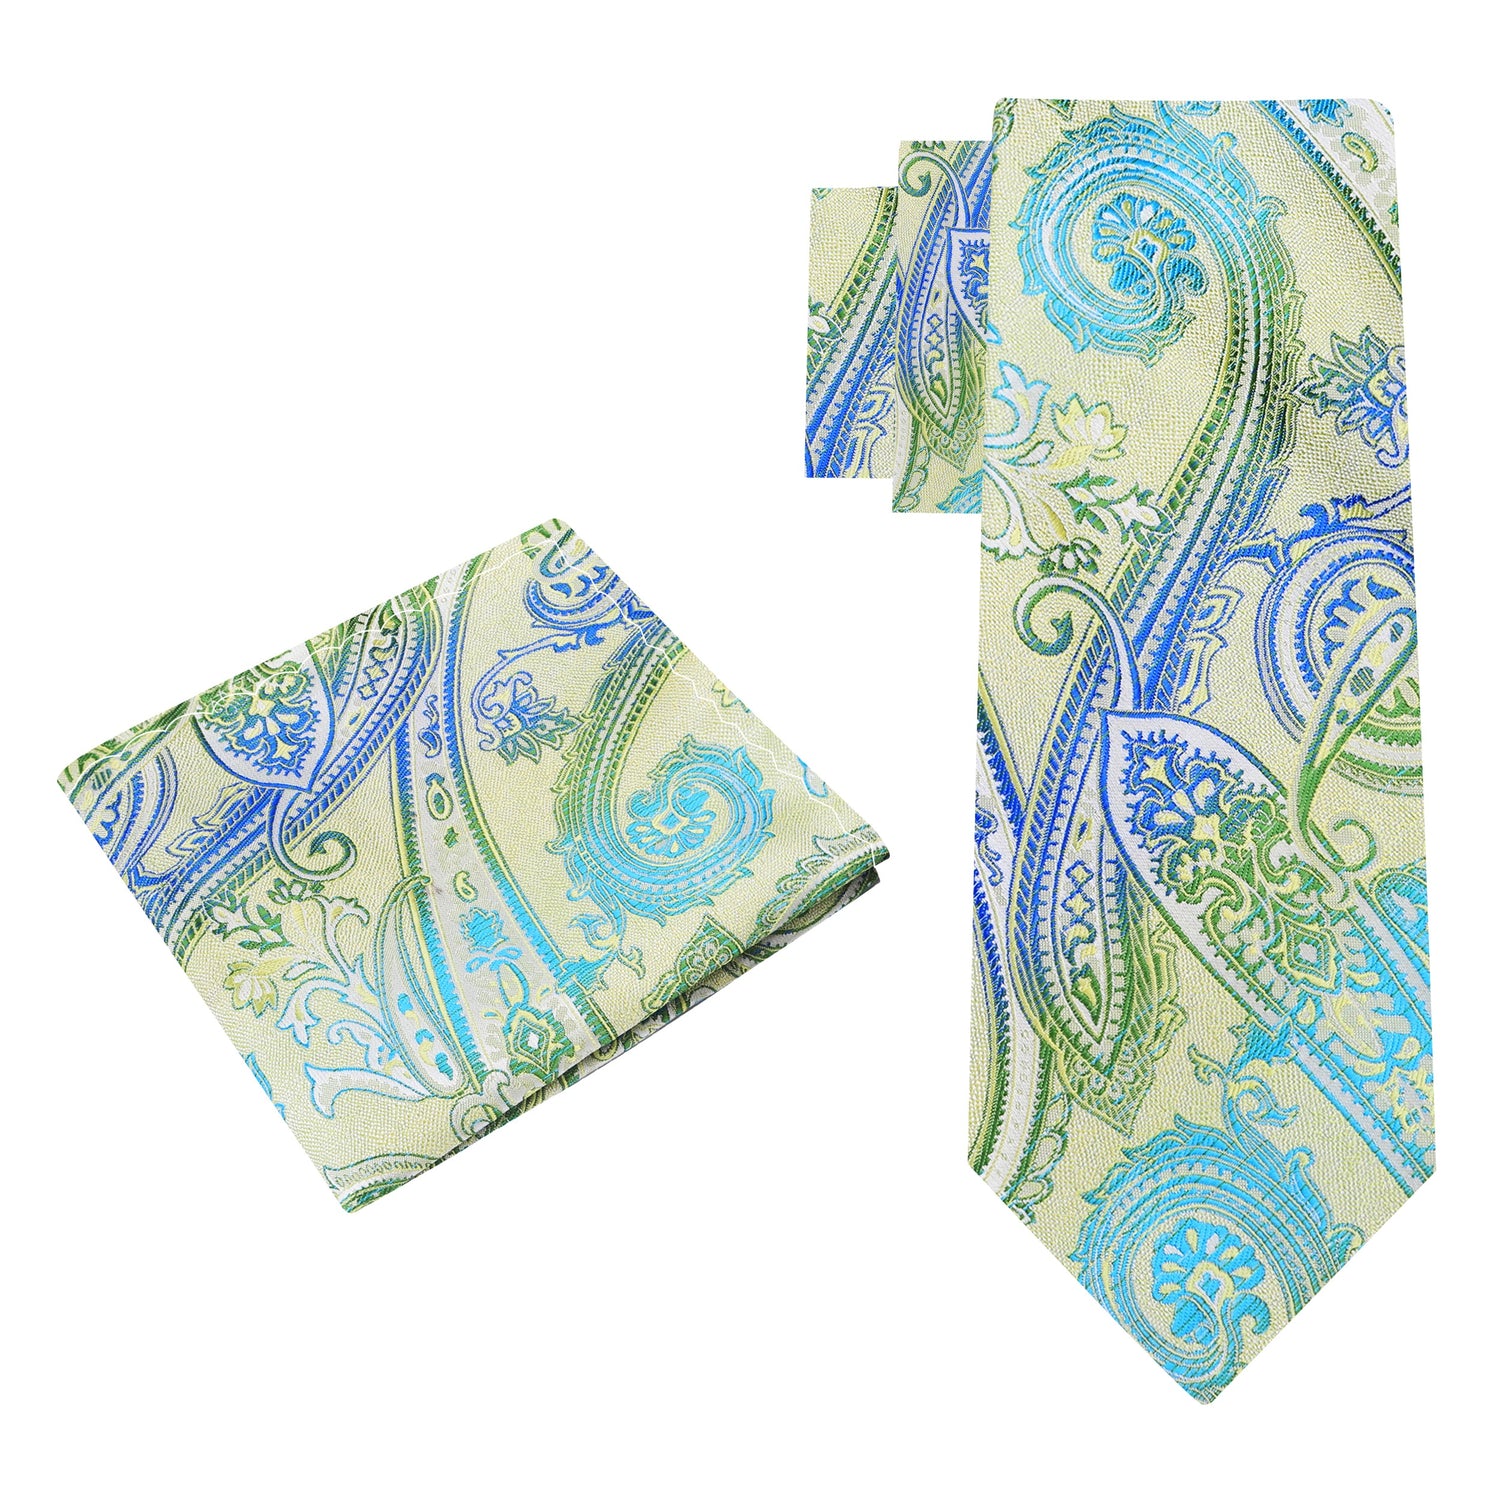 Alt View: A Bright Green, Blue Paisley Pattern Silk Necktie, Matching Pocket Square